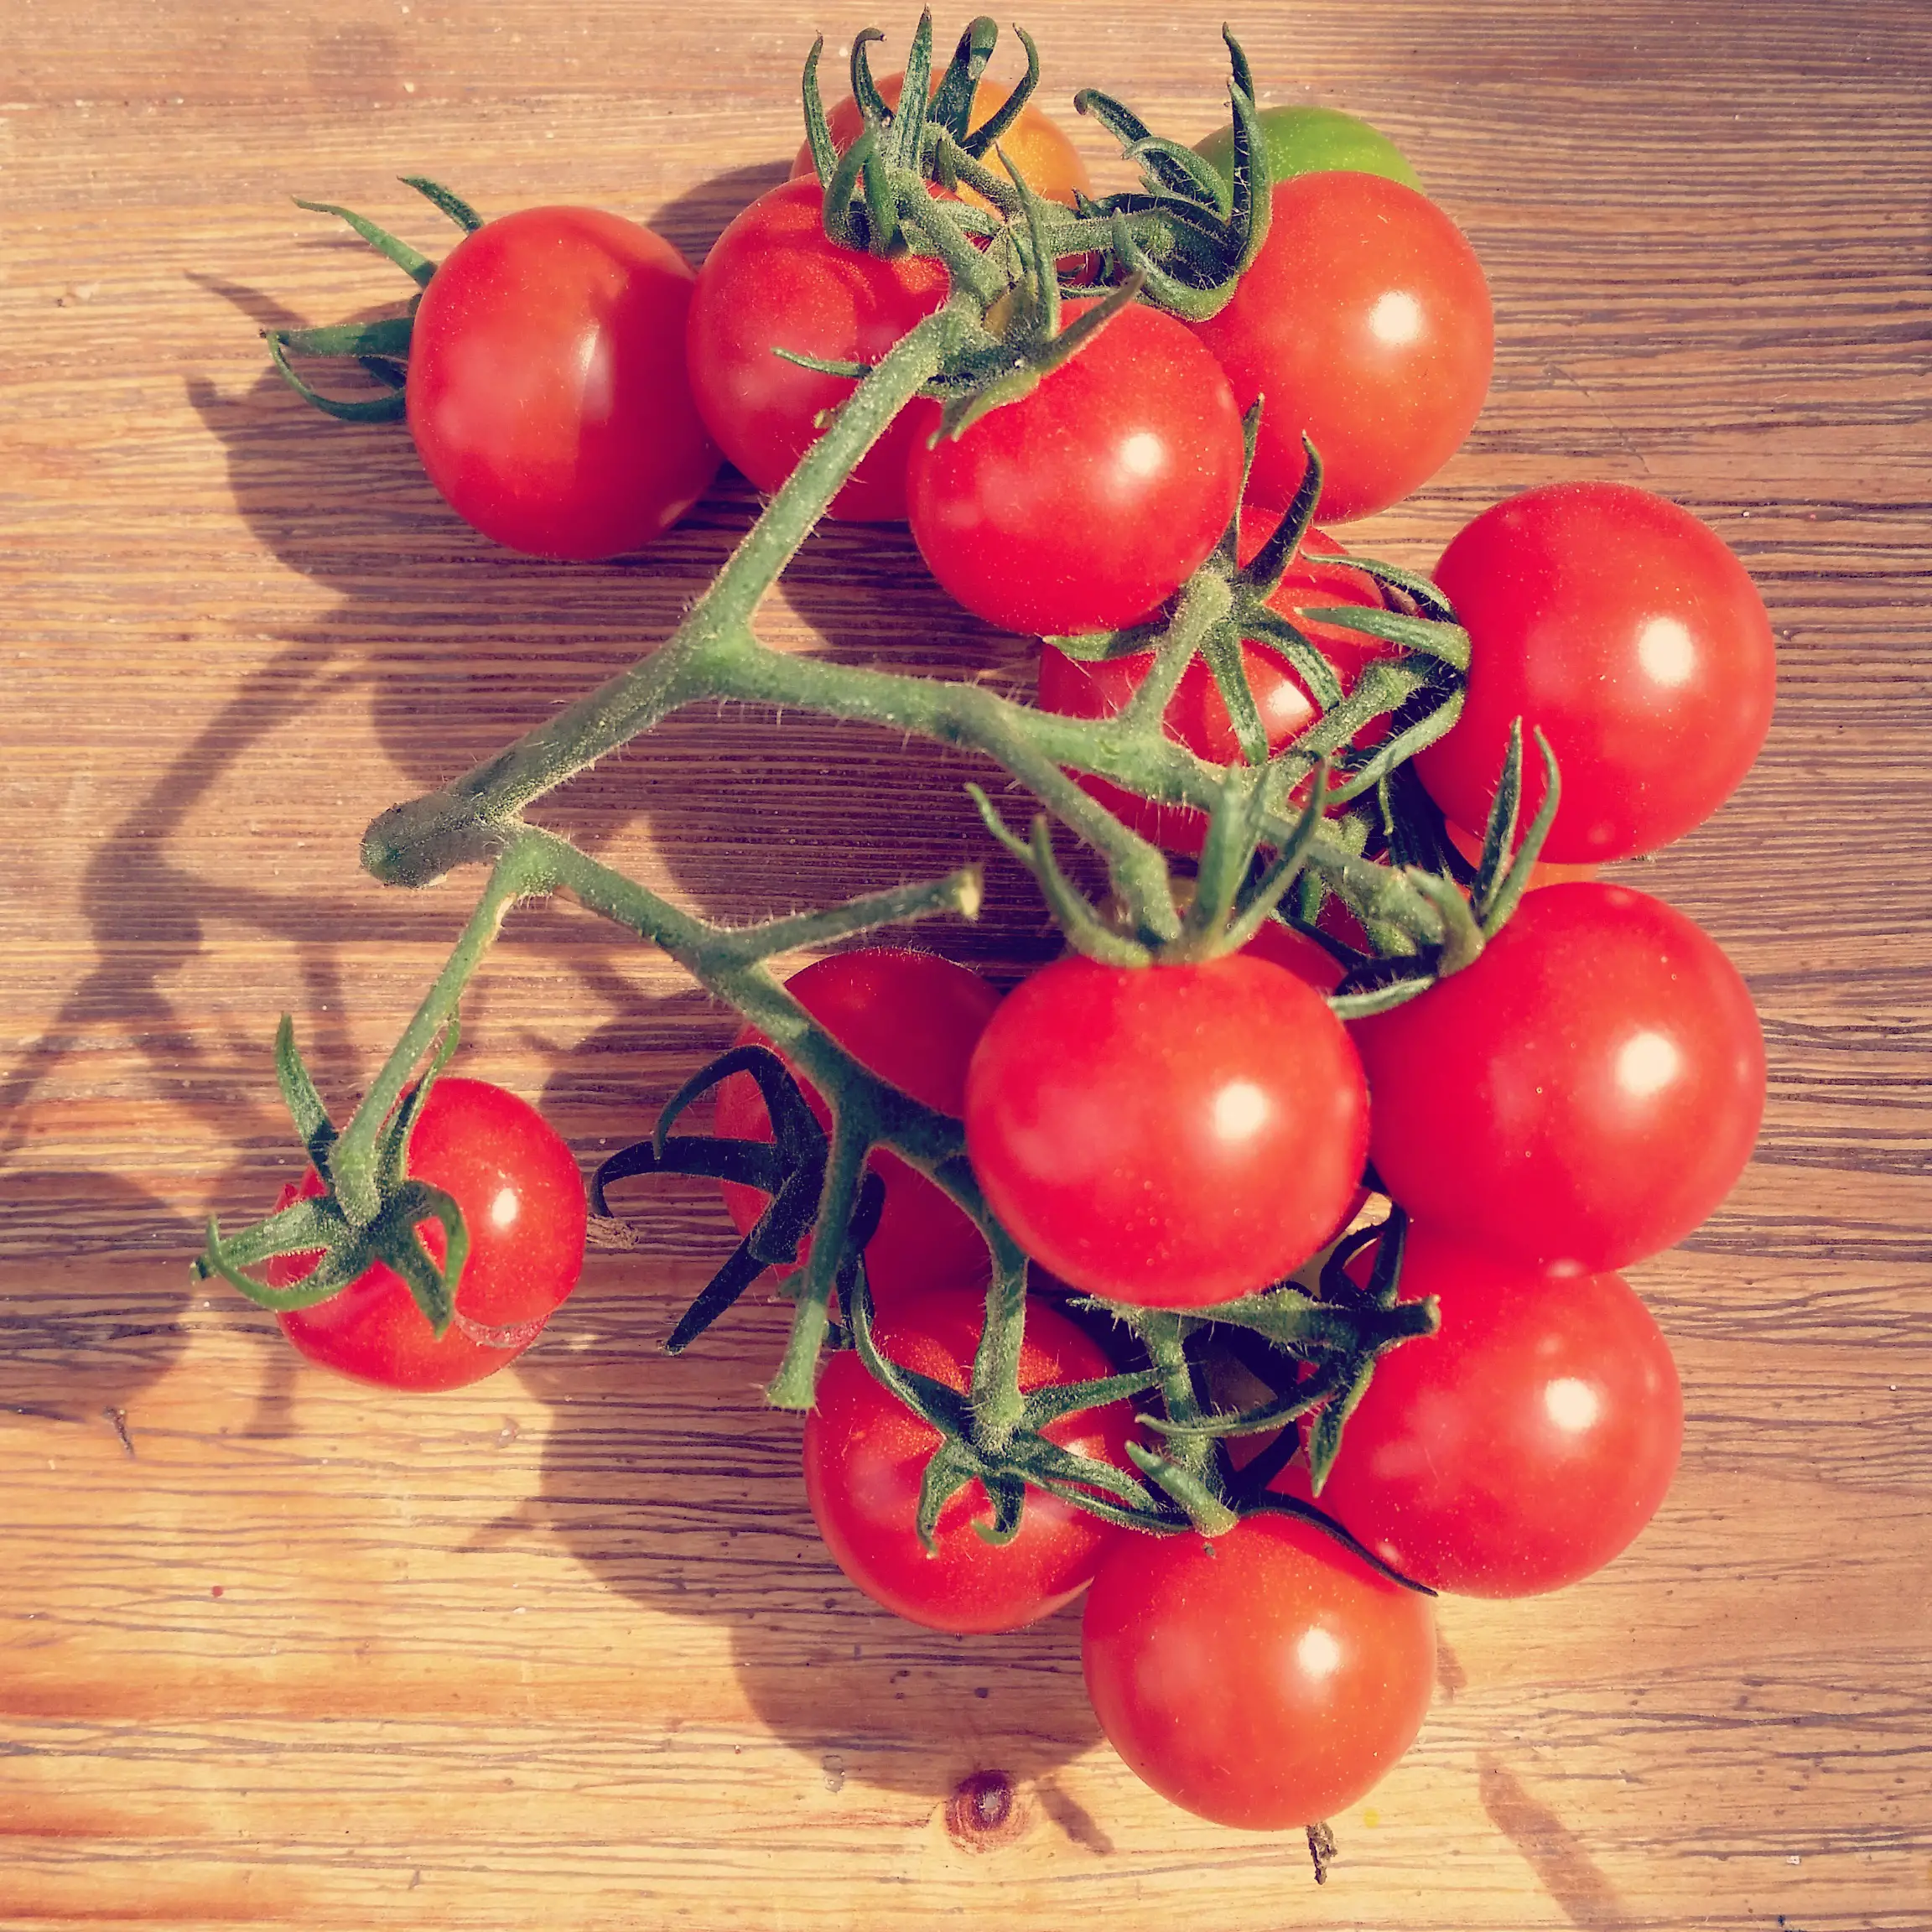 Tips for Extending Your Greenhouse Tomato Harvest